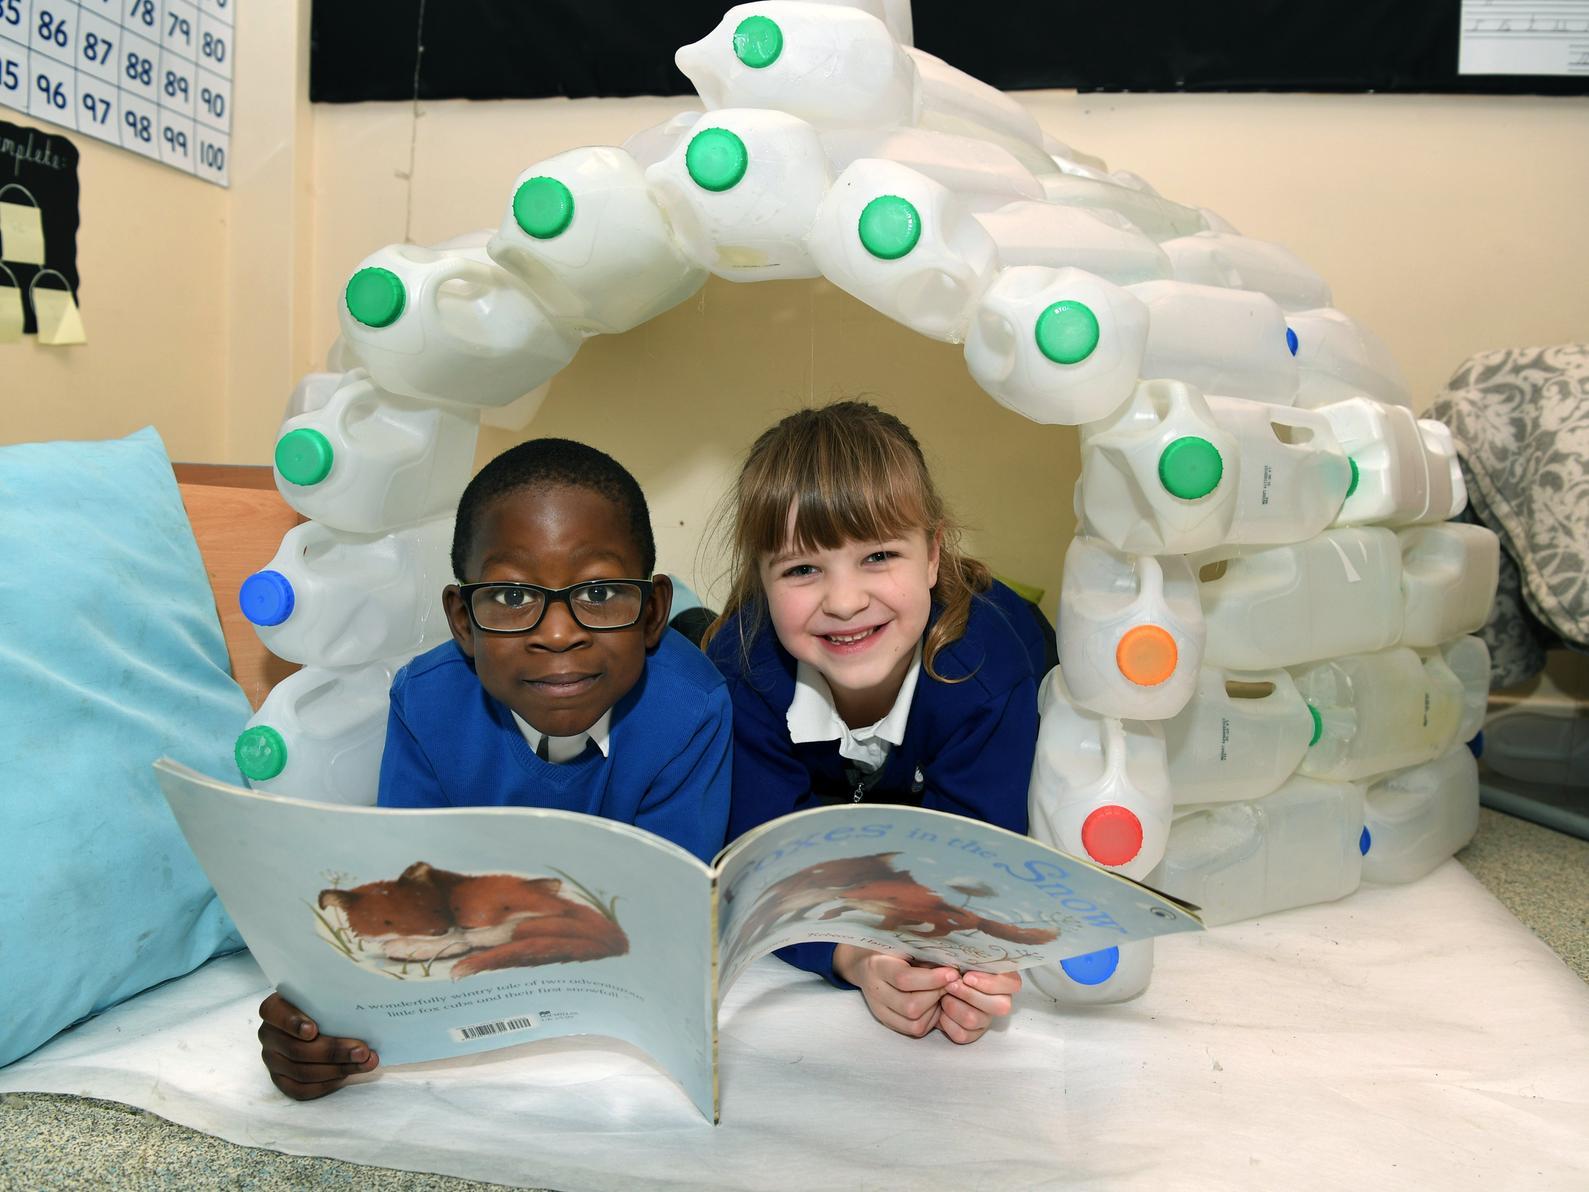 Pupils Immanuel and Lucy in an igloo that forms part of the Arctic display at Sharp Lane Primary School.